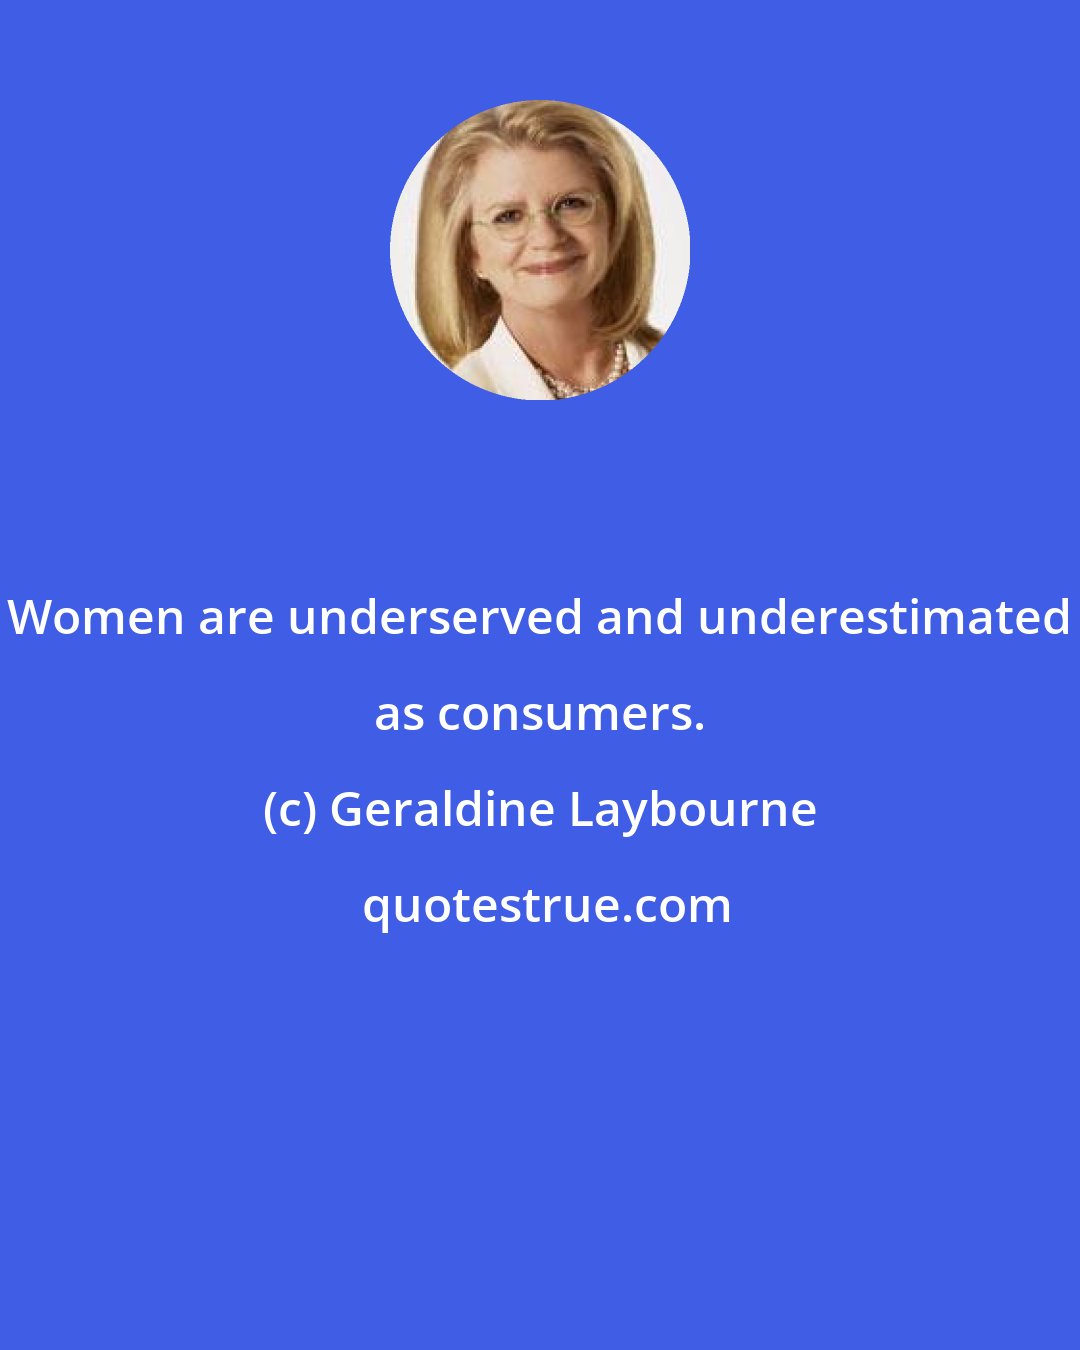 Geraldine Laybourne: Women are underserved and underestimated as consumers.